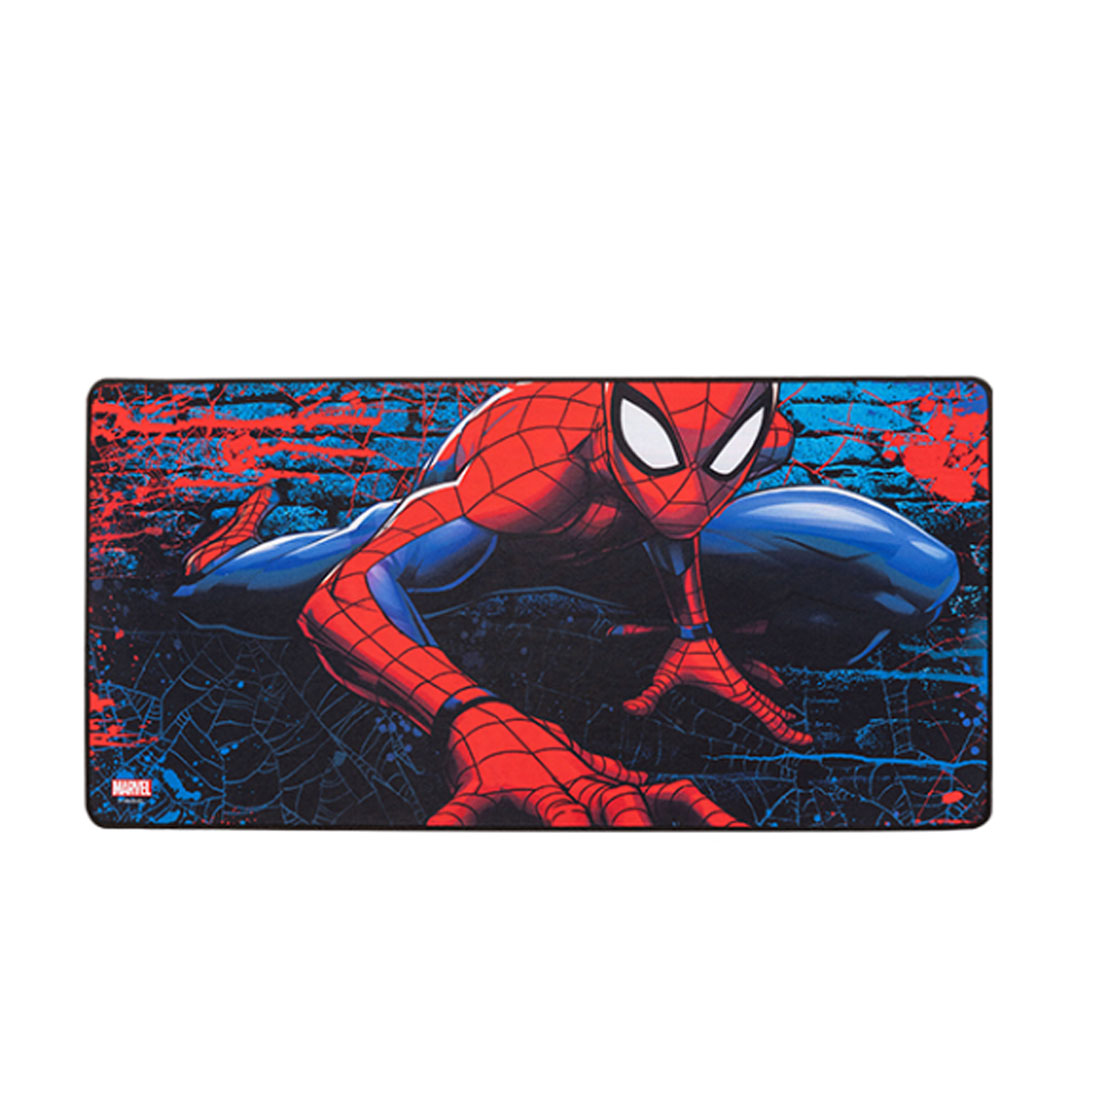 MINISO Marvel Desk Pad Office Non-Slip Desk Cover Protector Desk Mat Mouse Pads Desk Writing Mat for Office and Home Work Spiderman - image 4 of 7